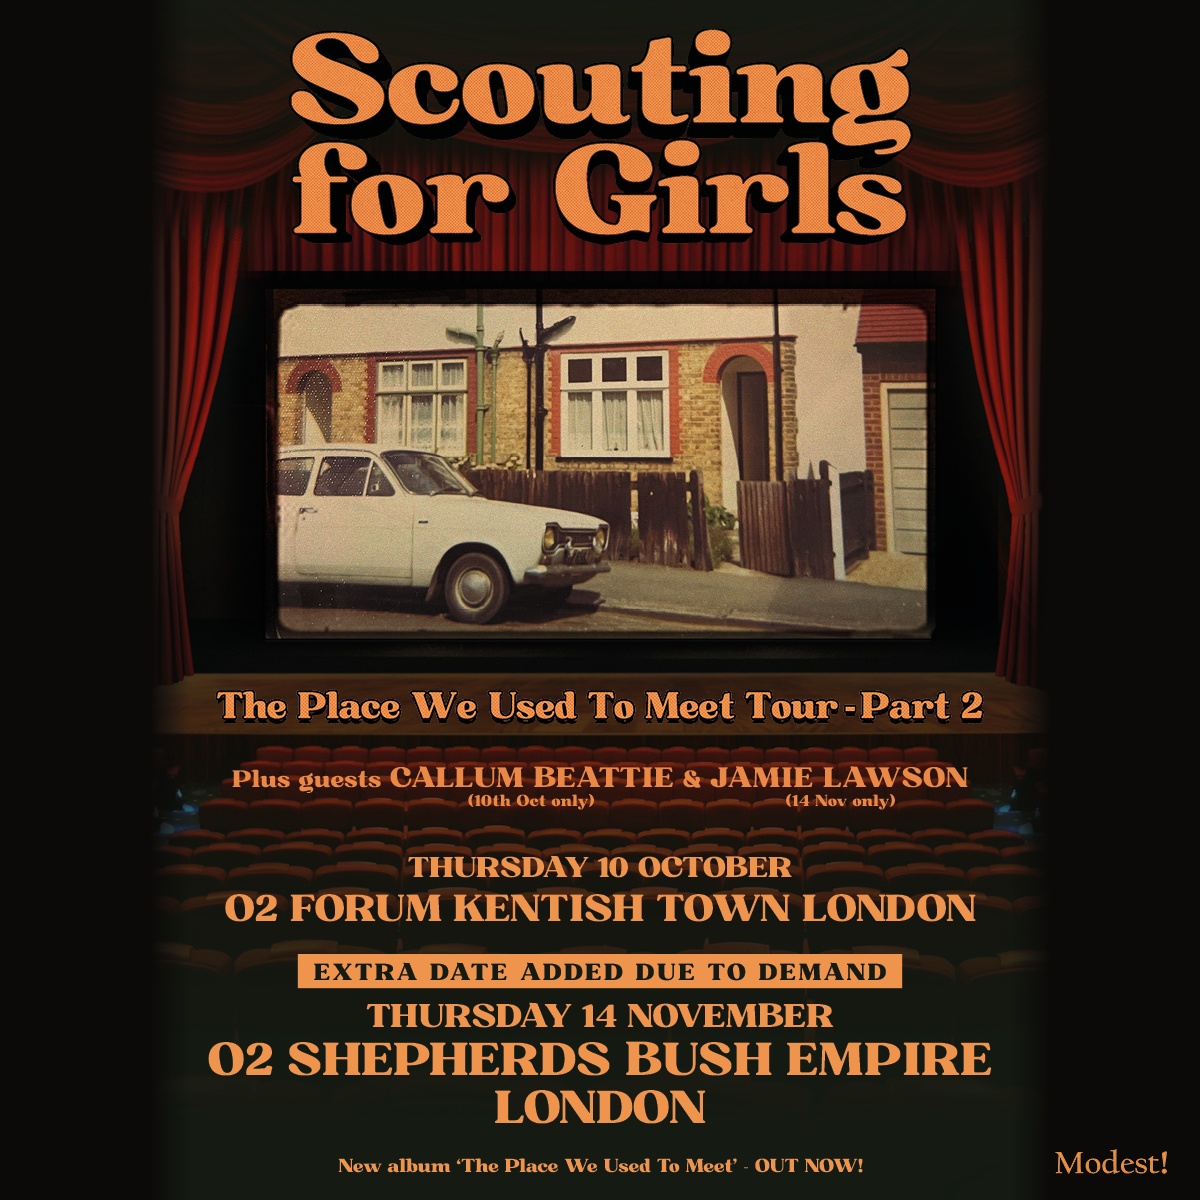 .@Scouting4Girls have added an extra night in London here on Thu 14 Nov. They're joined by @jamielawsonuk. Tickets are on sale now 👉 amg-venues.com/2Z9g50RjB3o #ScoutingForGirls